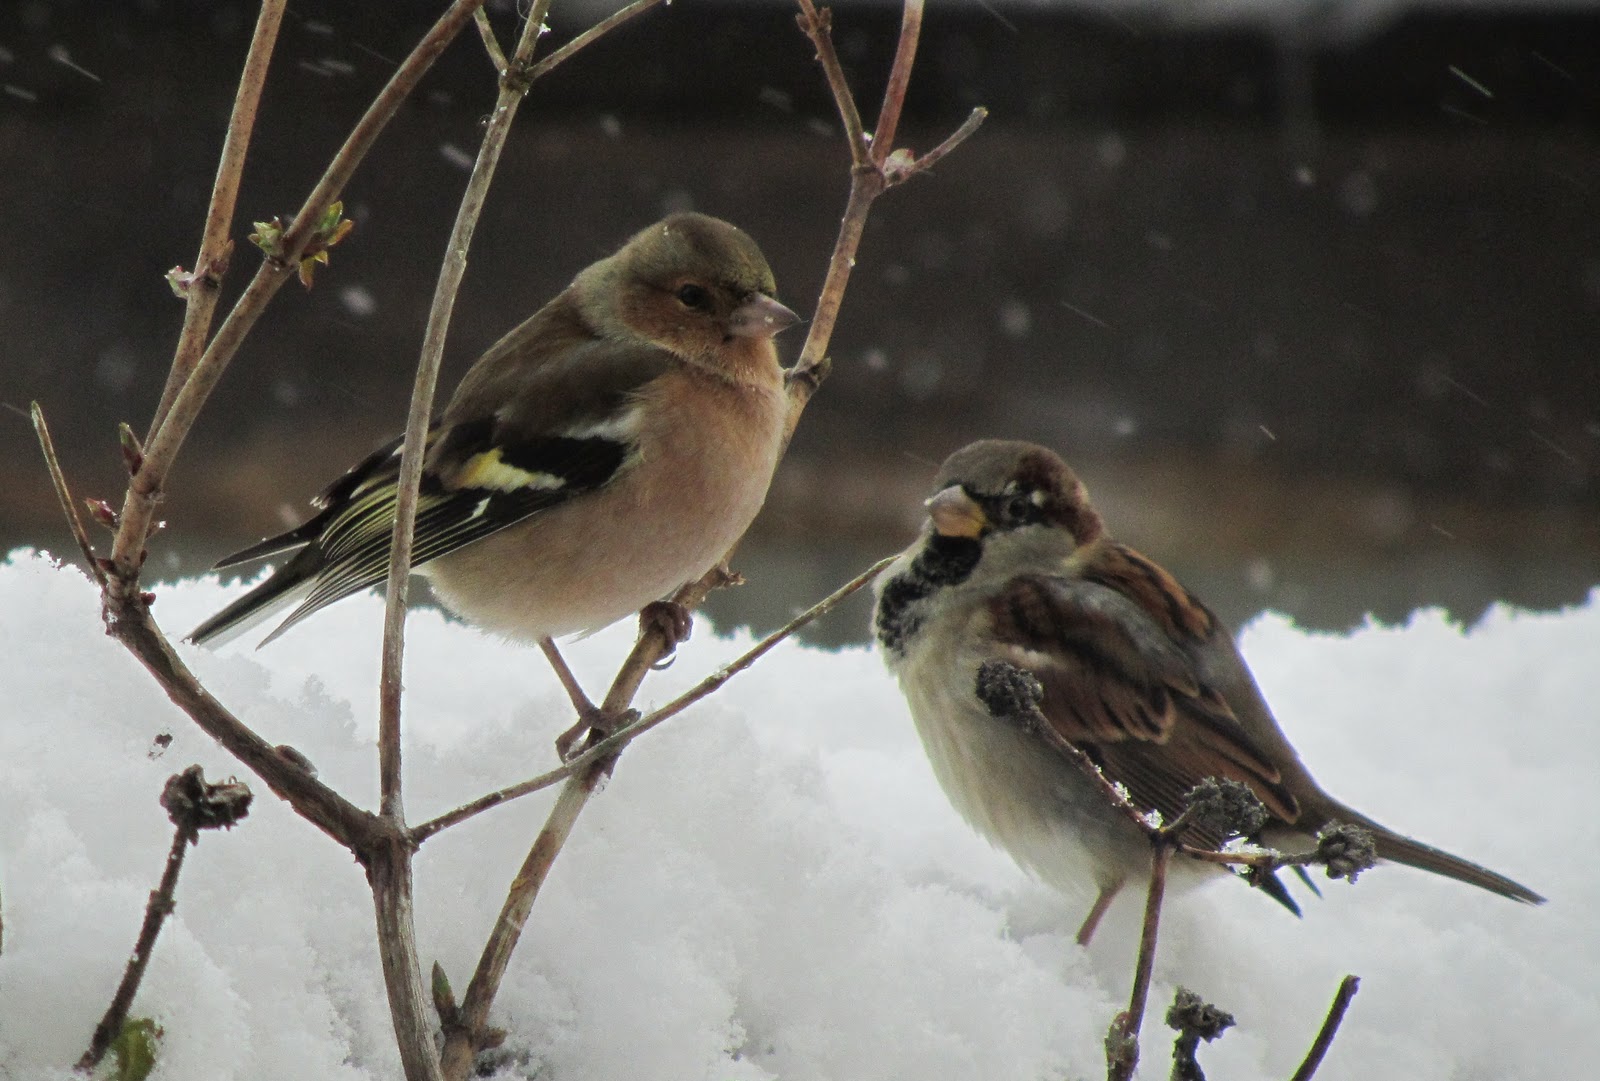 Chaffinch+and+sparrow+together.jpg